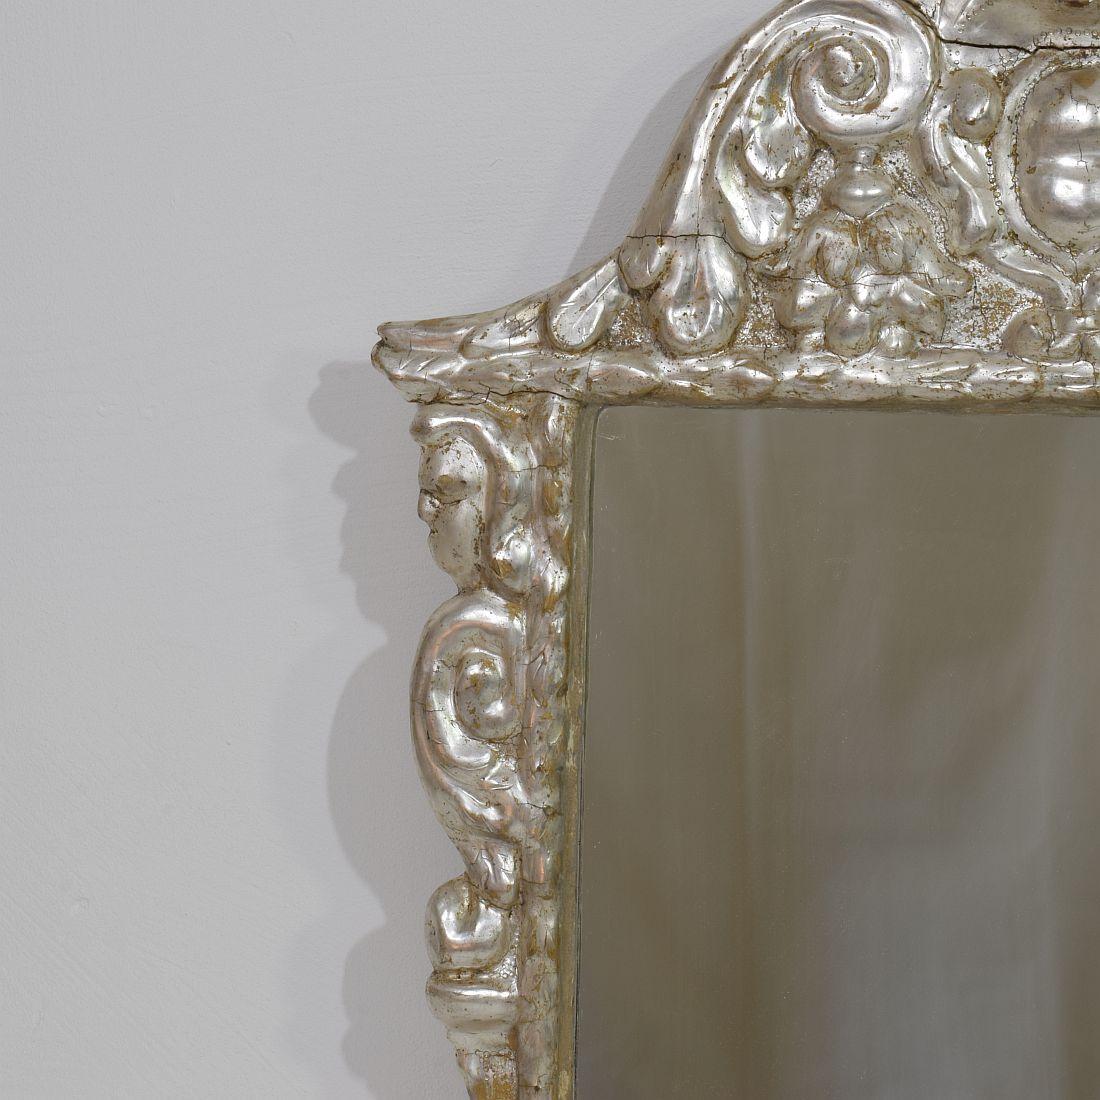 Italian 17th/ 18th Century Baroque Carved Wooden Silverleaf Mirror With Angels In Good Condition For Sale In Buisson, FR